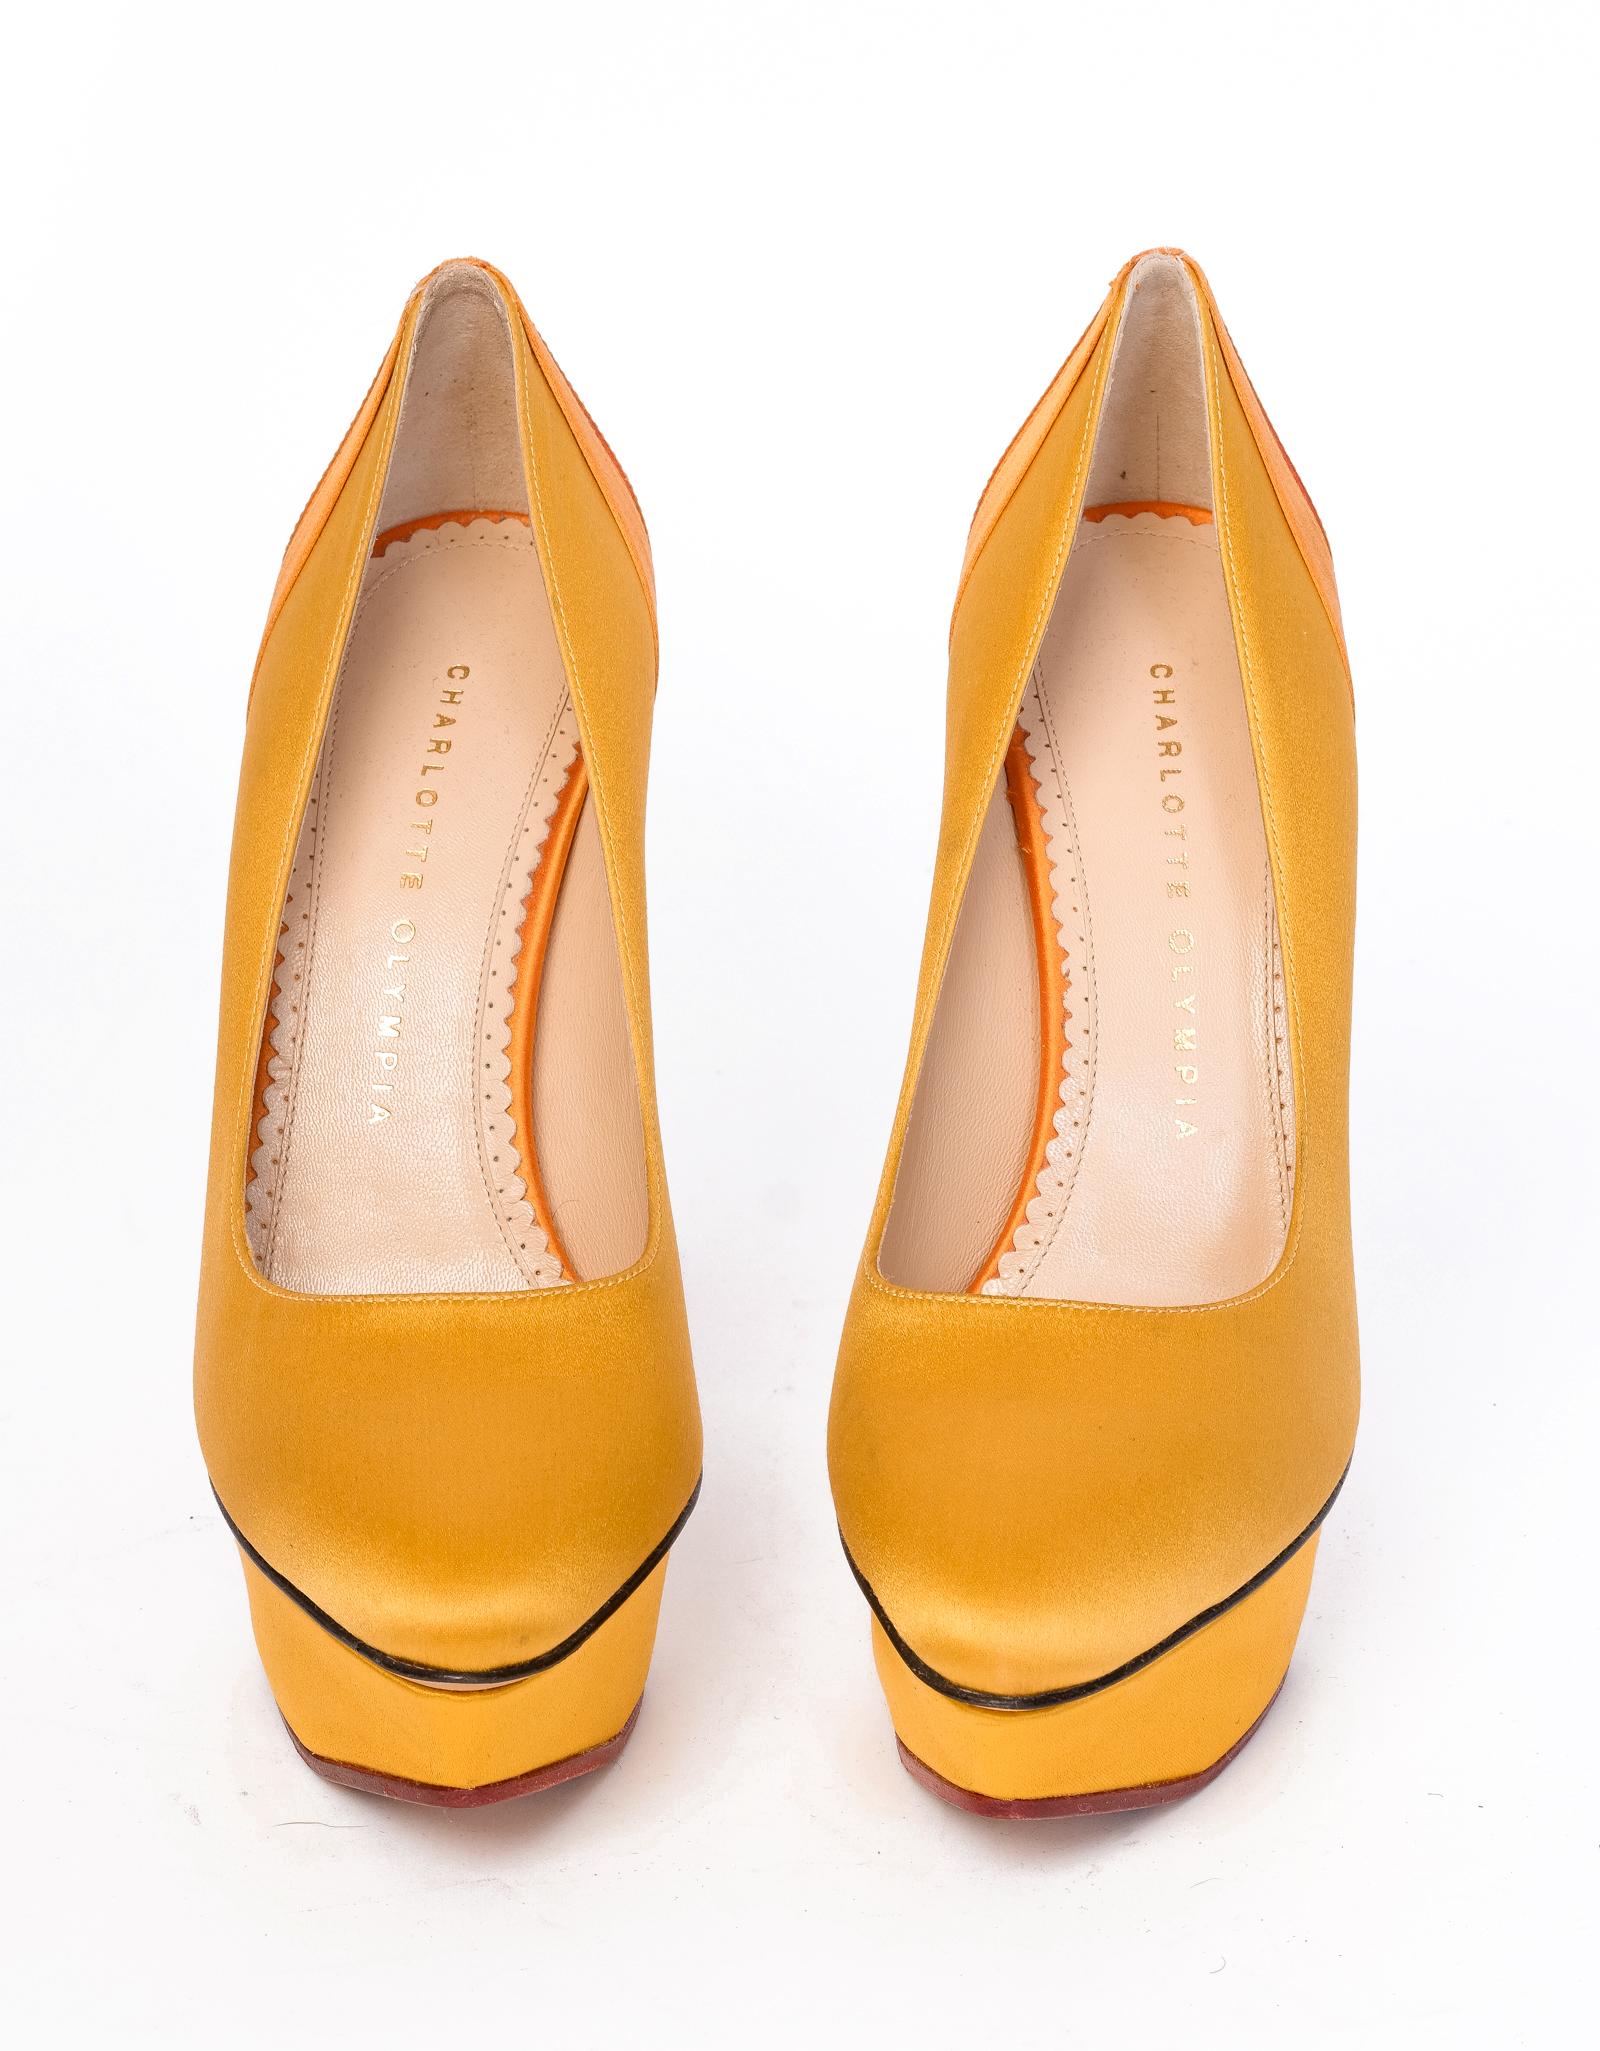 Charlotte Olympia Masako orange color block platform pumps. Featuring an orange leather and satin exterior, a beige suede interior, beige leather bottoms, orange satin heels with a height of 140 mm, and platforms with a height of 40 mm.
	
COLOR: